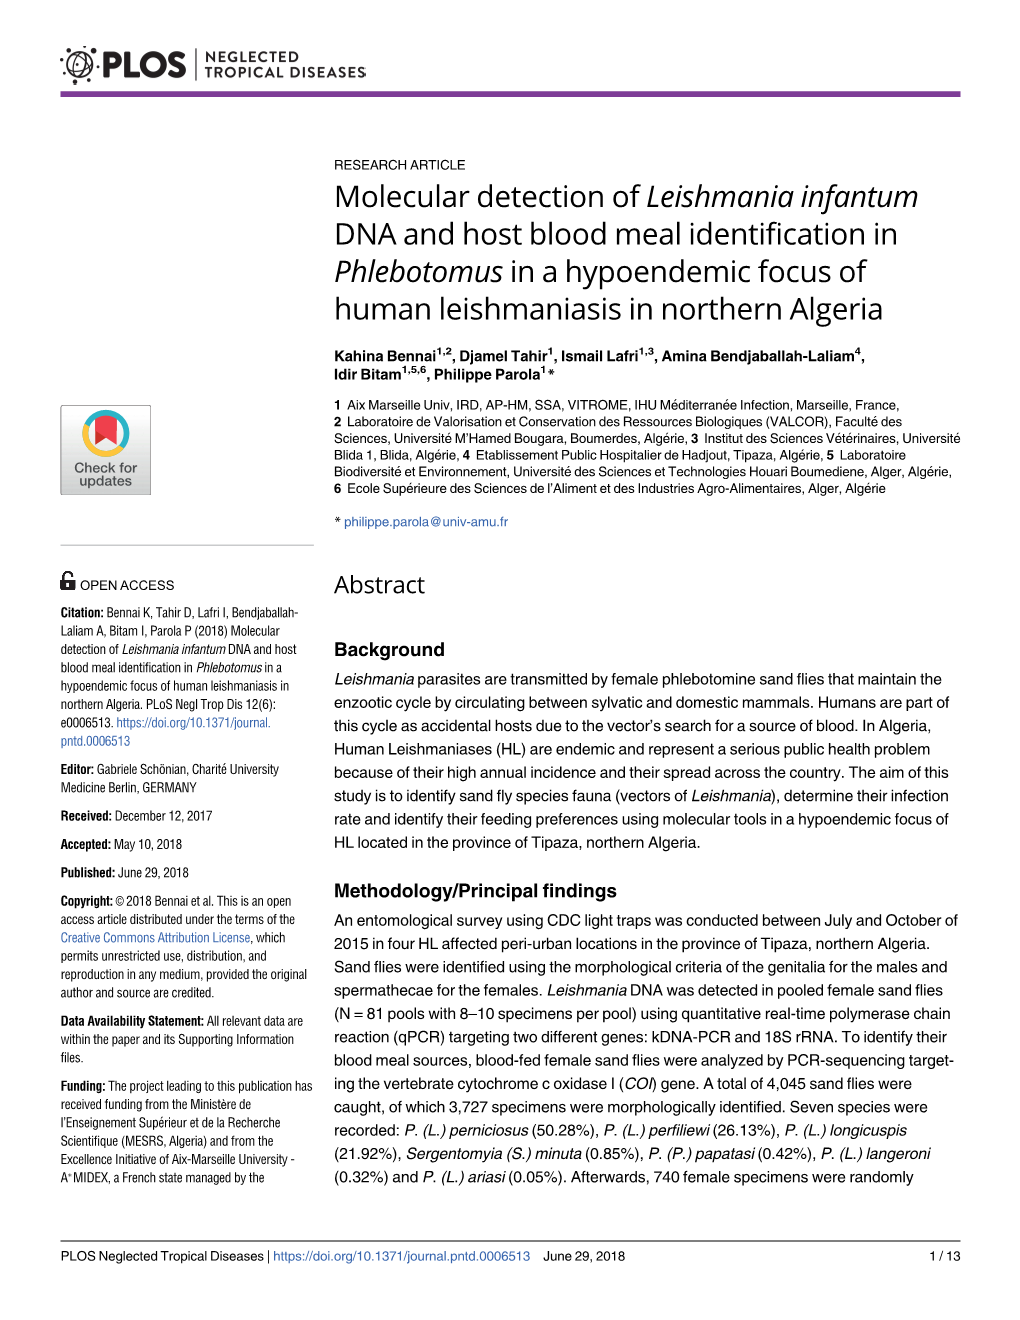 Molecular Detection of Leishmania Infantum DNA and Host Blood Meal Identification in Phlebotomus in a Hypoendemic Focus of Human Leishmaniasis in Northern Algeria